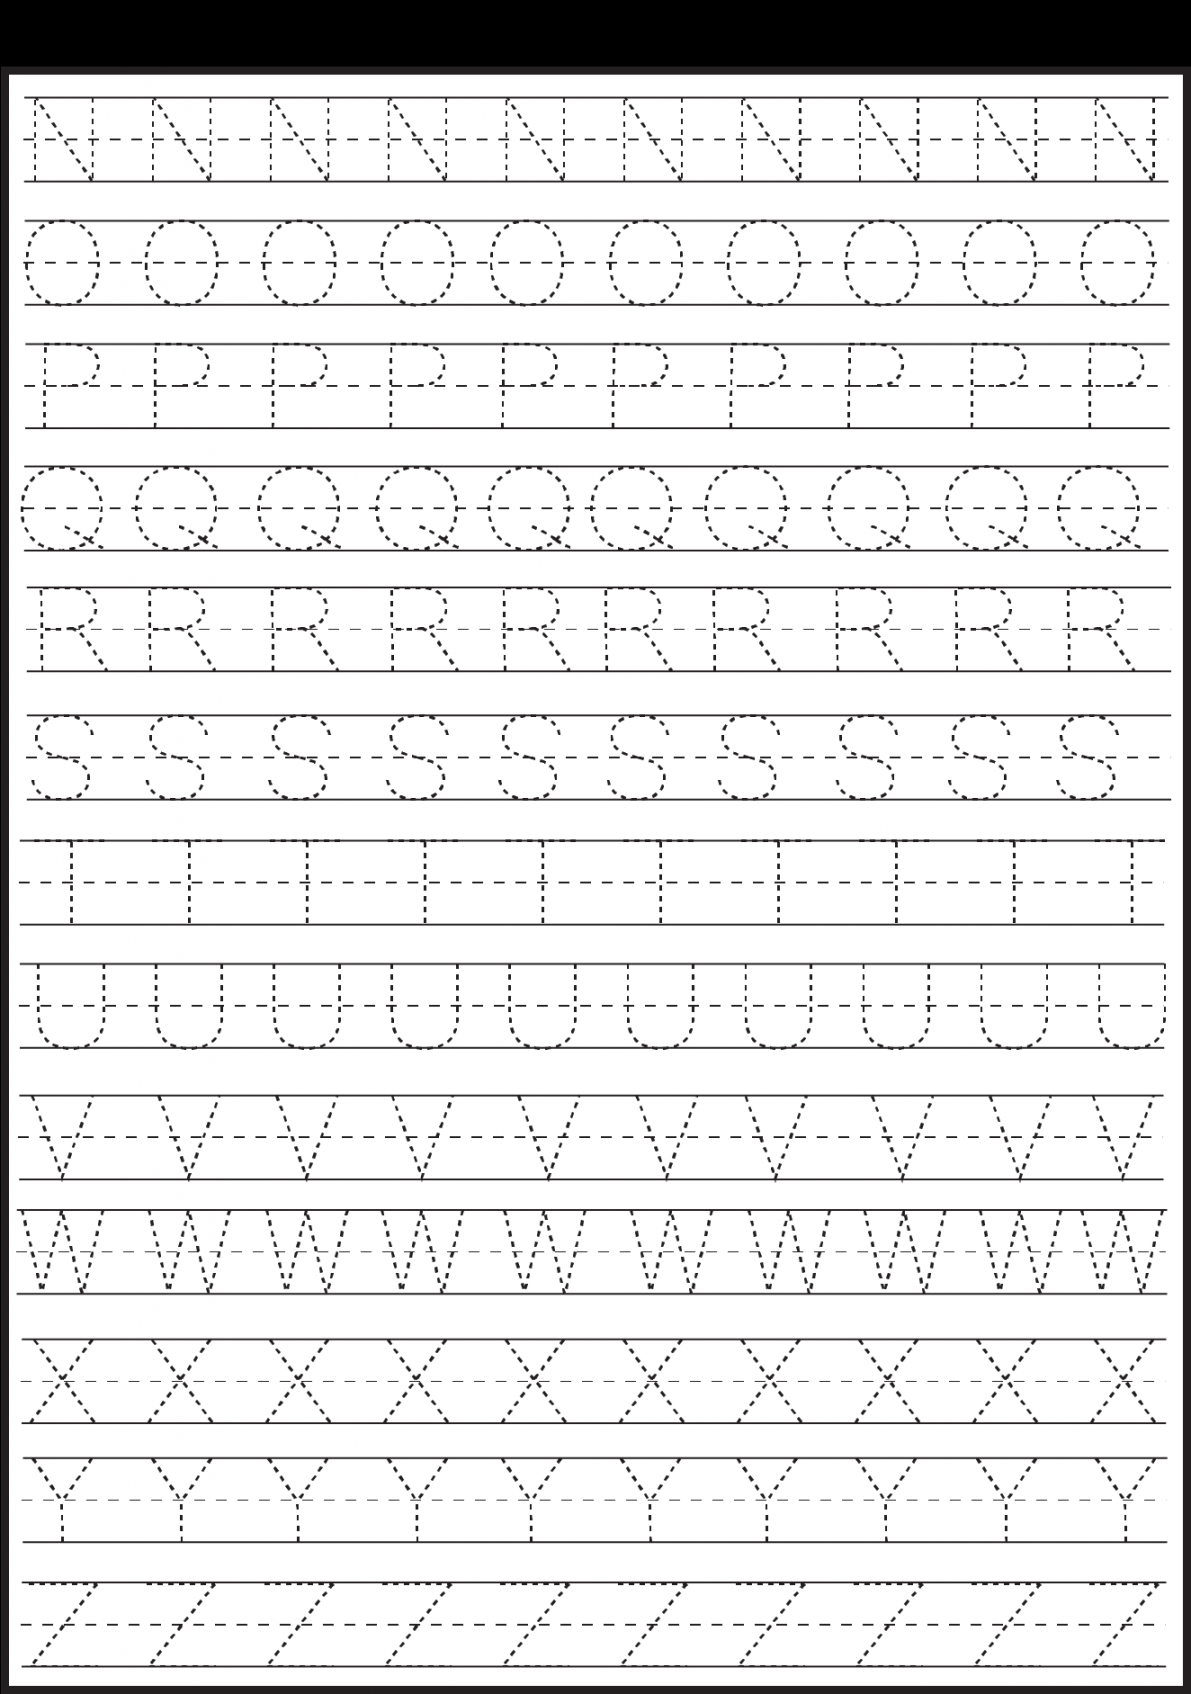 Letter Tracing –  Worksheets / FREE Printable Worksheets  Shape  - FREE Printables - Handwriting Free Printable Preschool Worksheets Tracing Letters